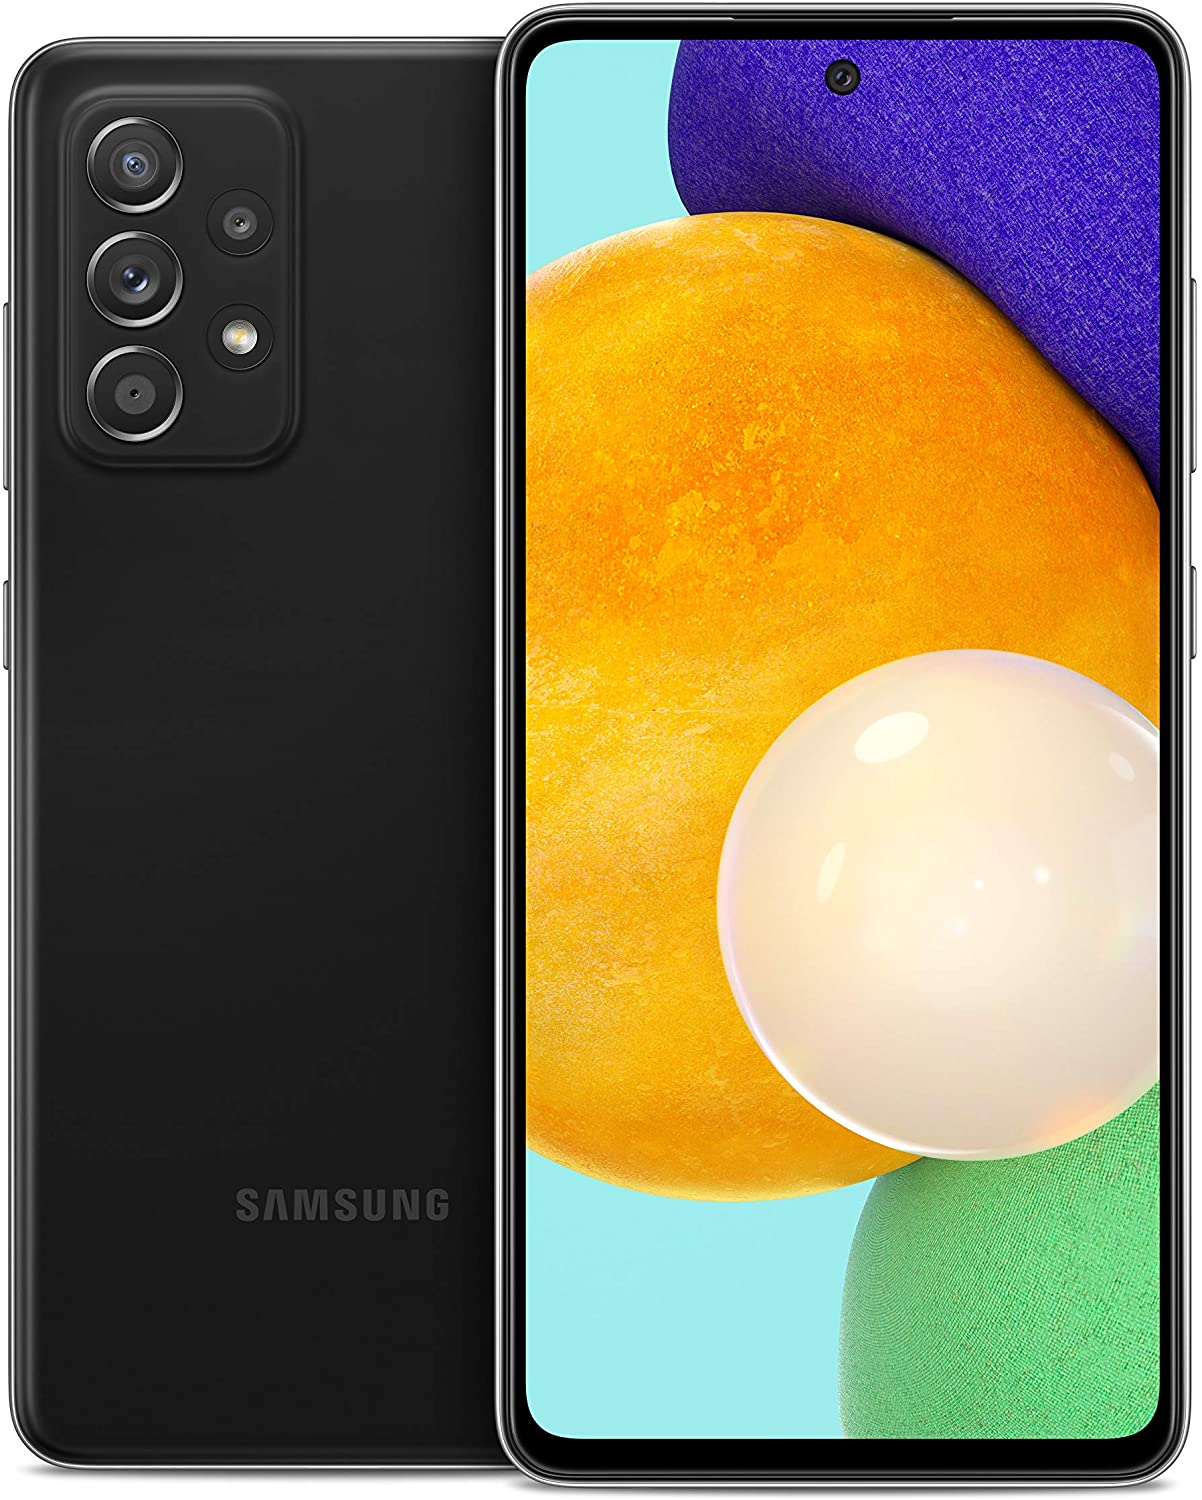 Amazon.com: Samsung Galaxy A52 5G, Factory Unlocked Smartphone, Android Cell Phone, Water Resistant, 64MP Camera, US Version, 128GB, Black $399